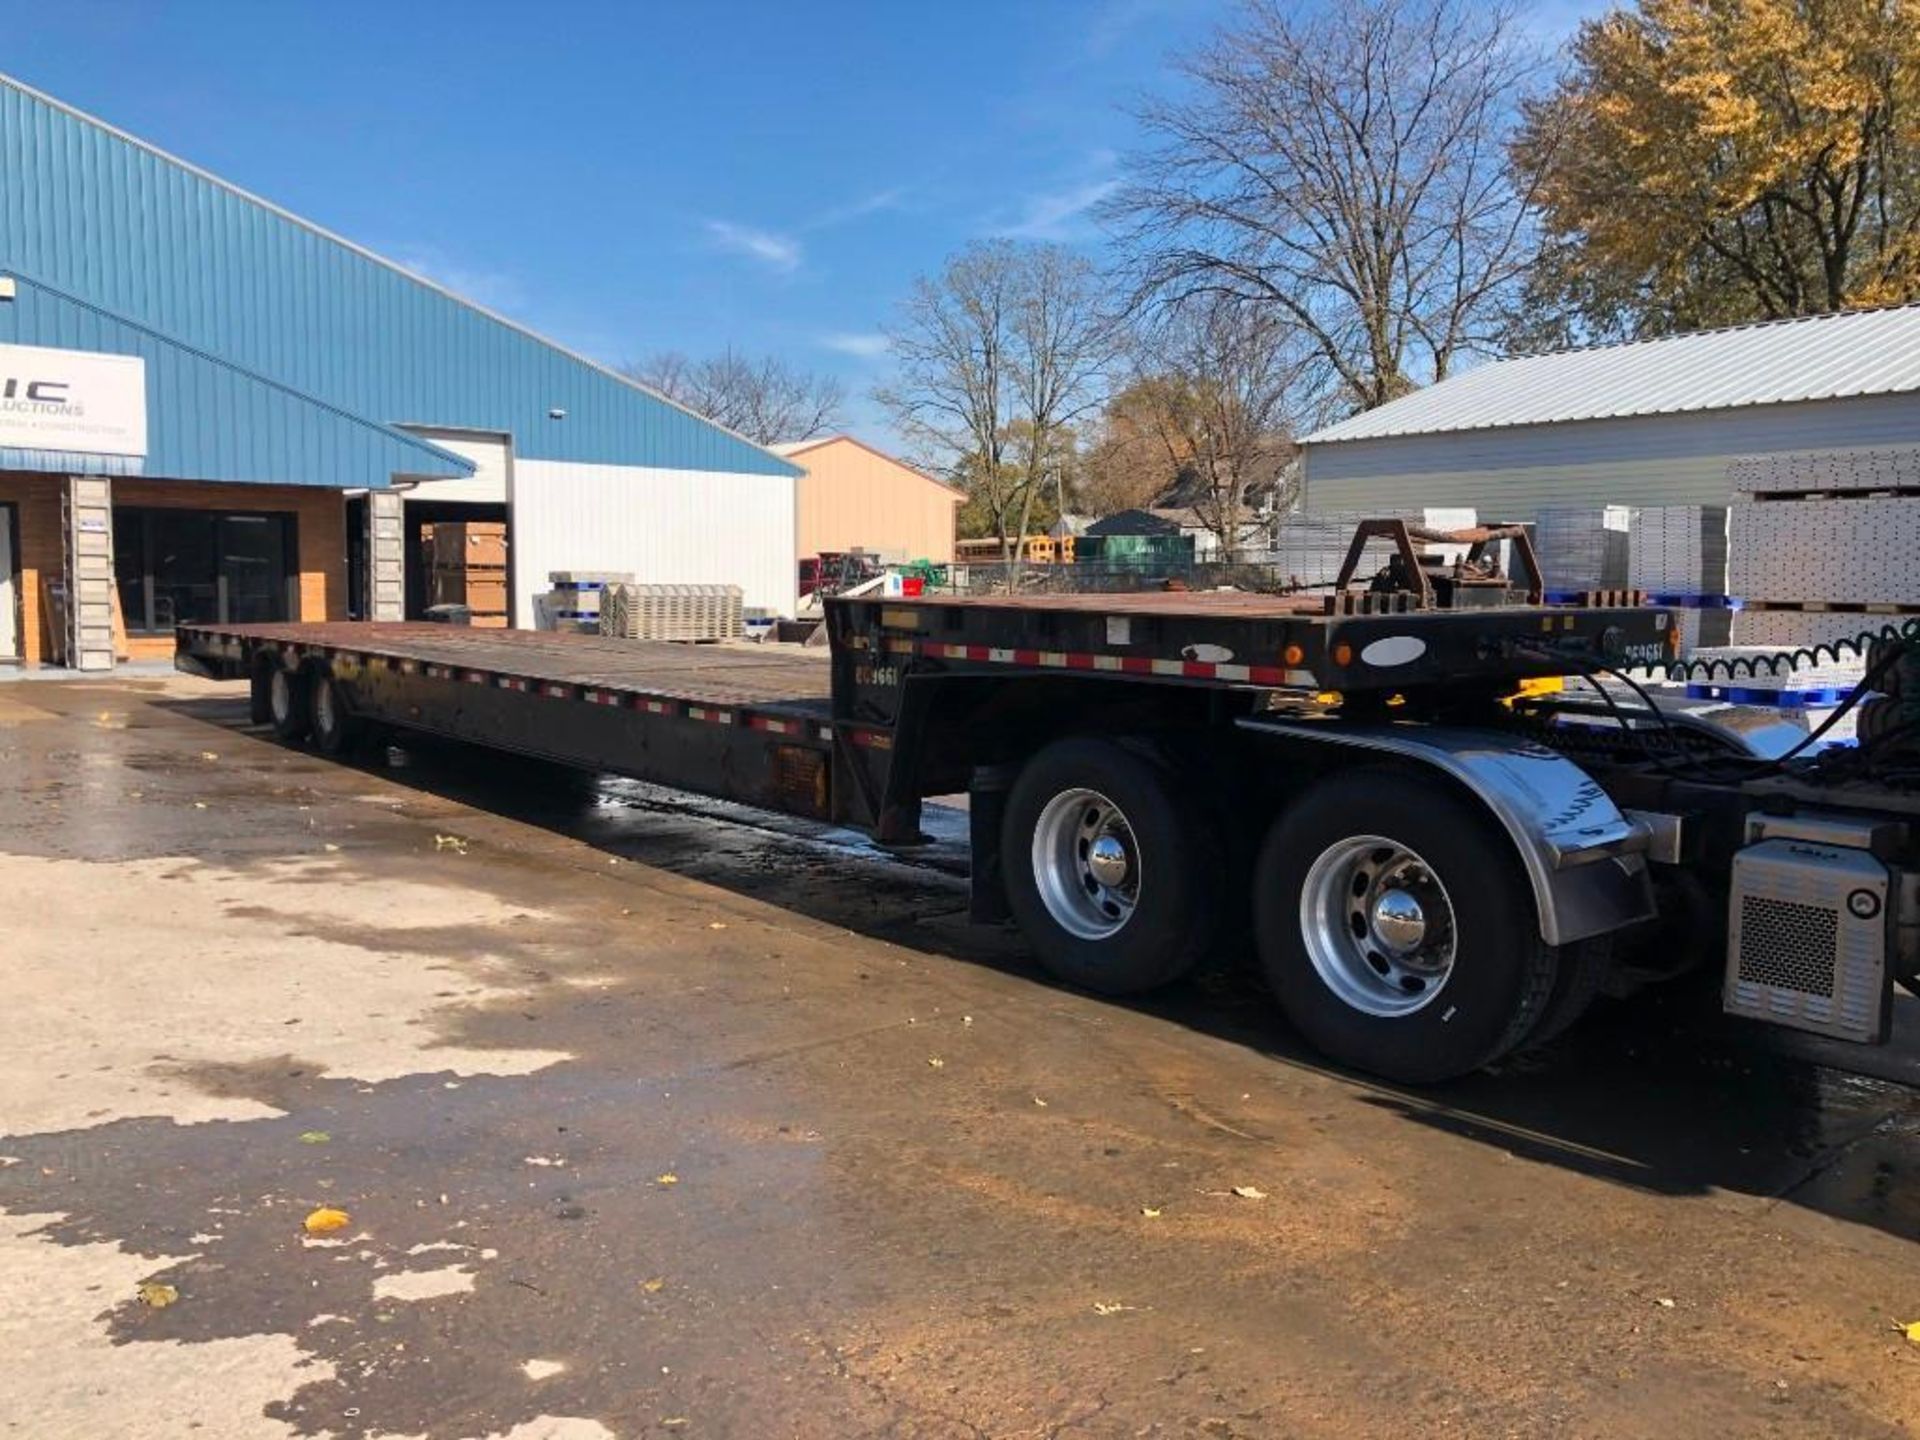 2011 Ledwell Hydratail Trailer Tandem Axle, VIN #1L9GA72A8BL033169, Model #LW4 with winch and scale.